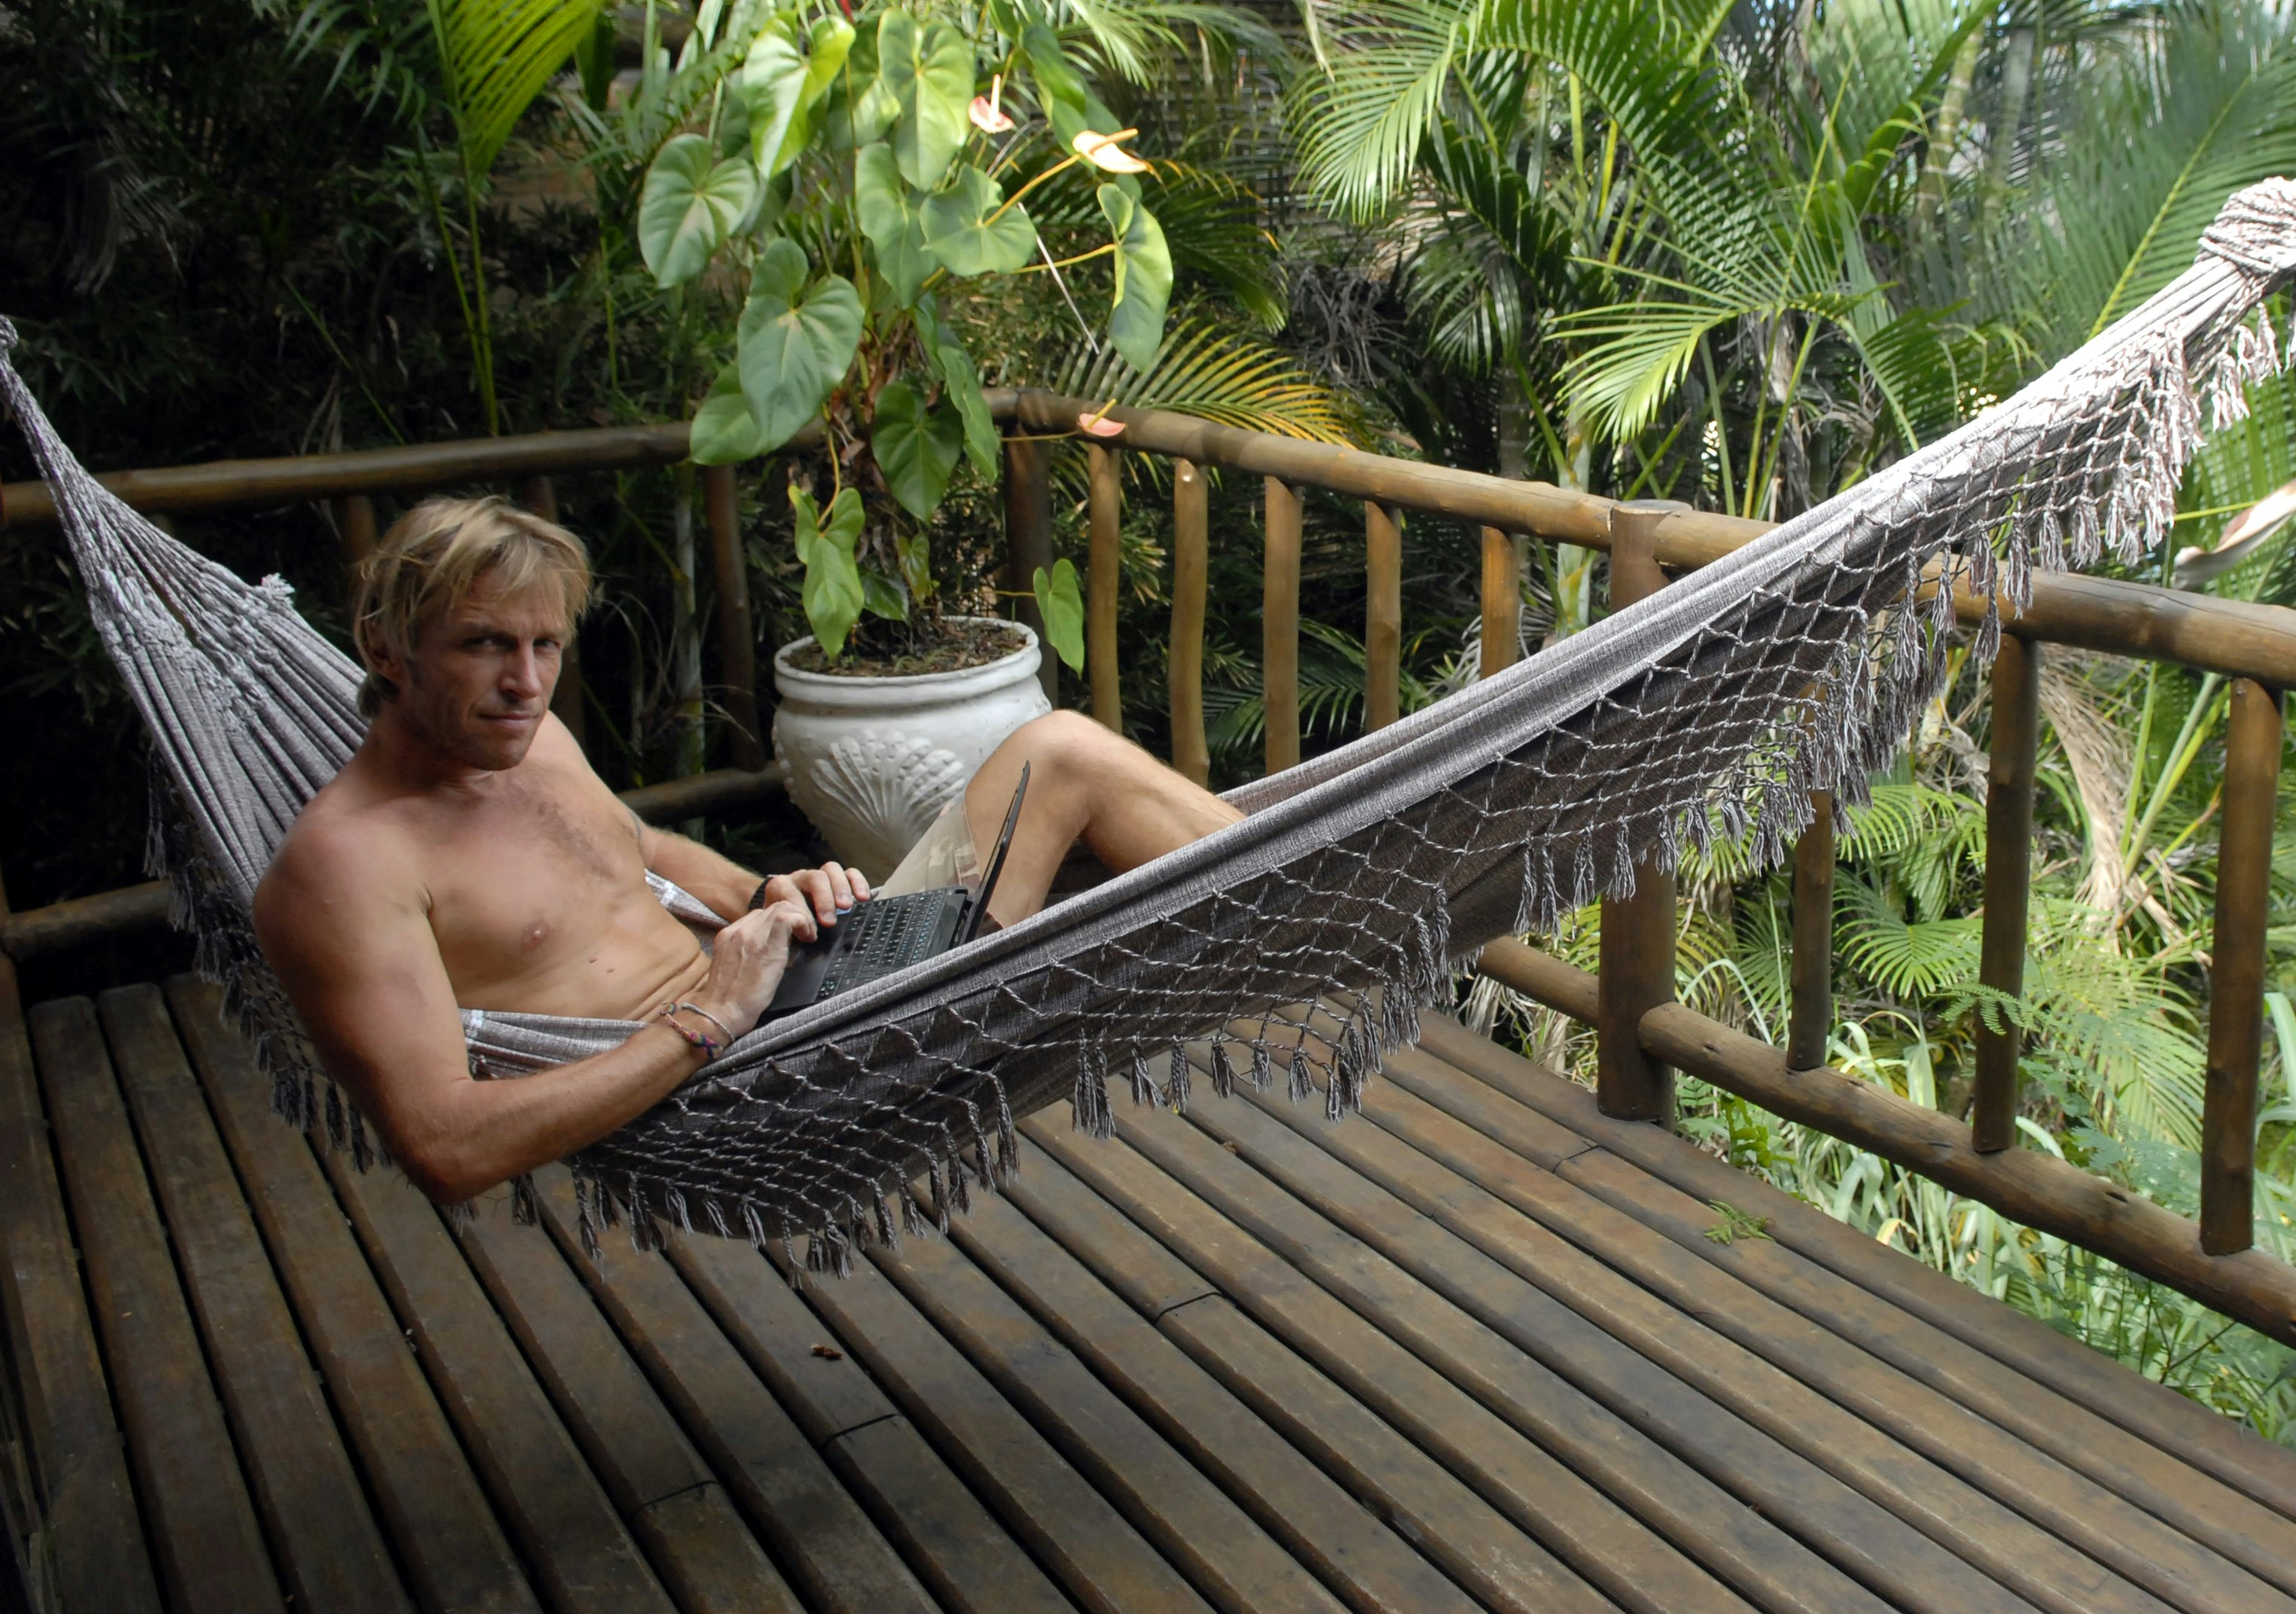 A man lies in a hammock on a wooden deck with his laptop